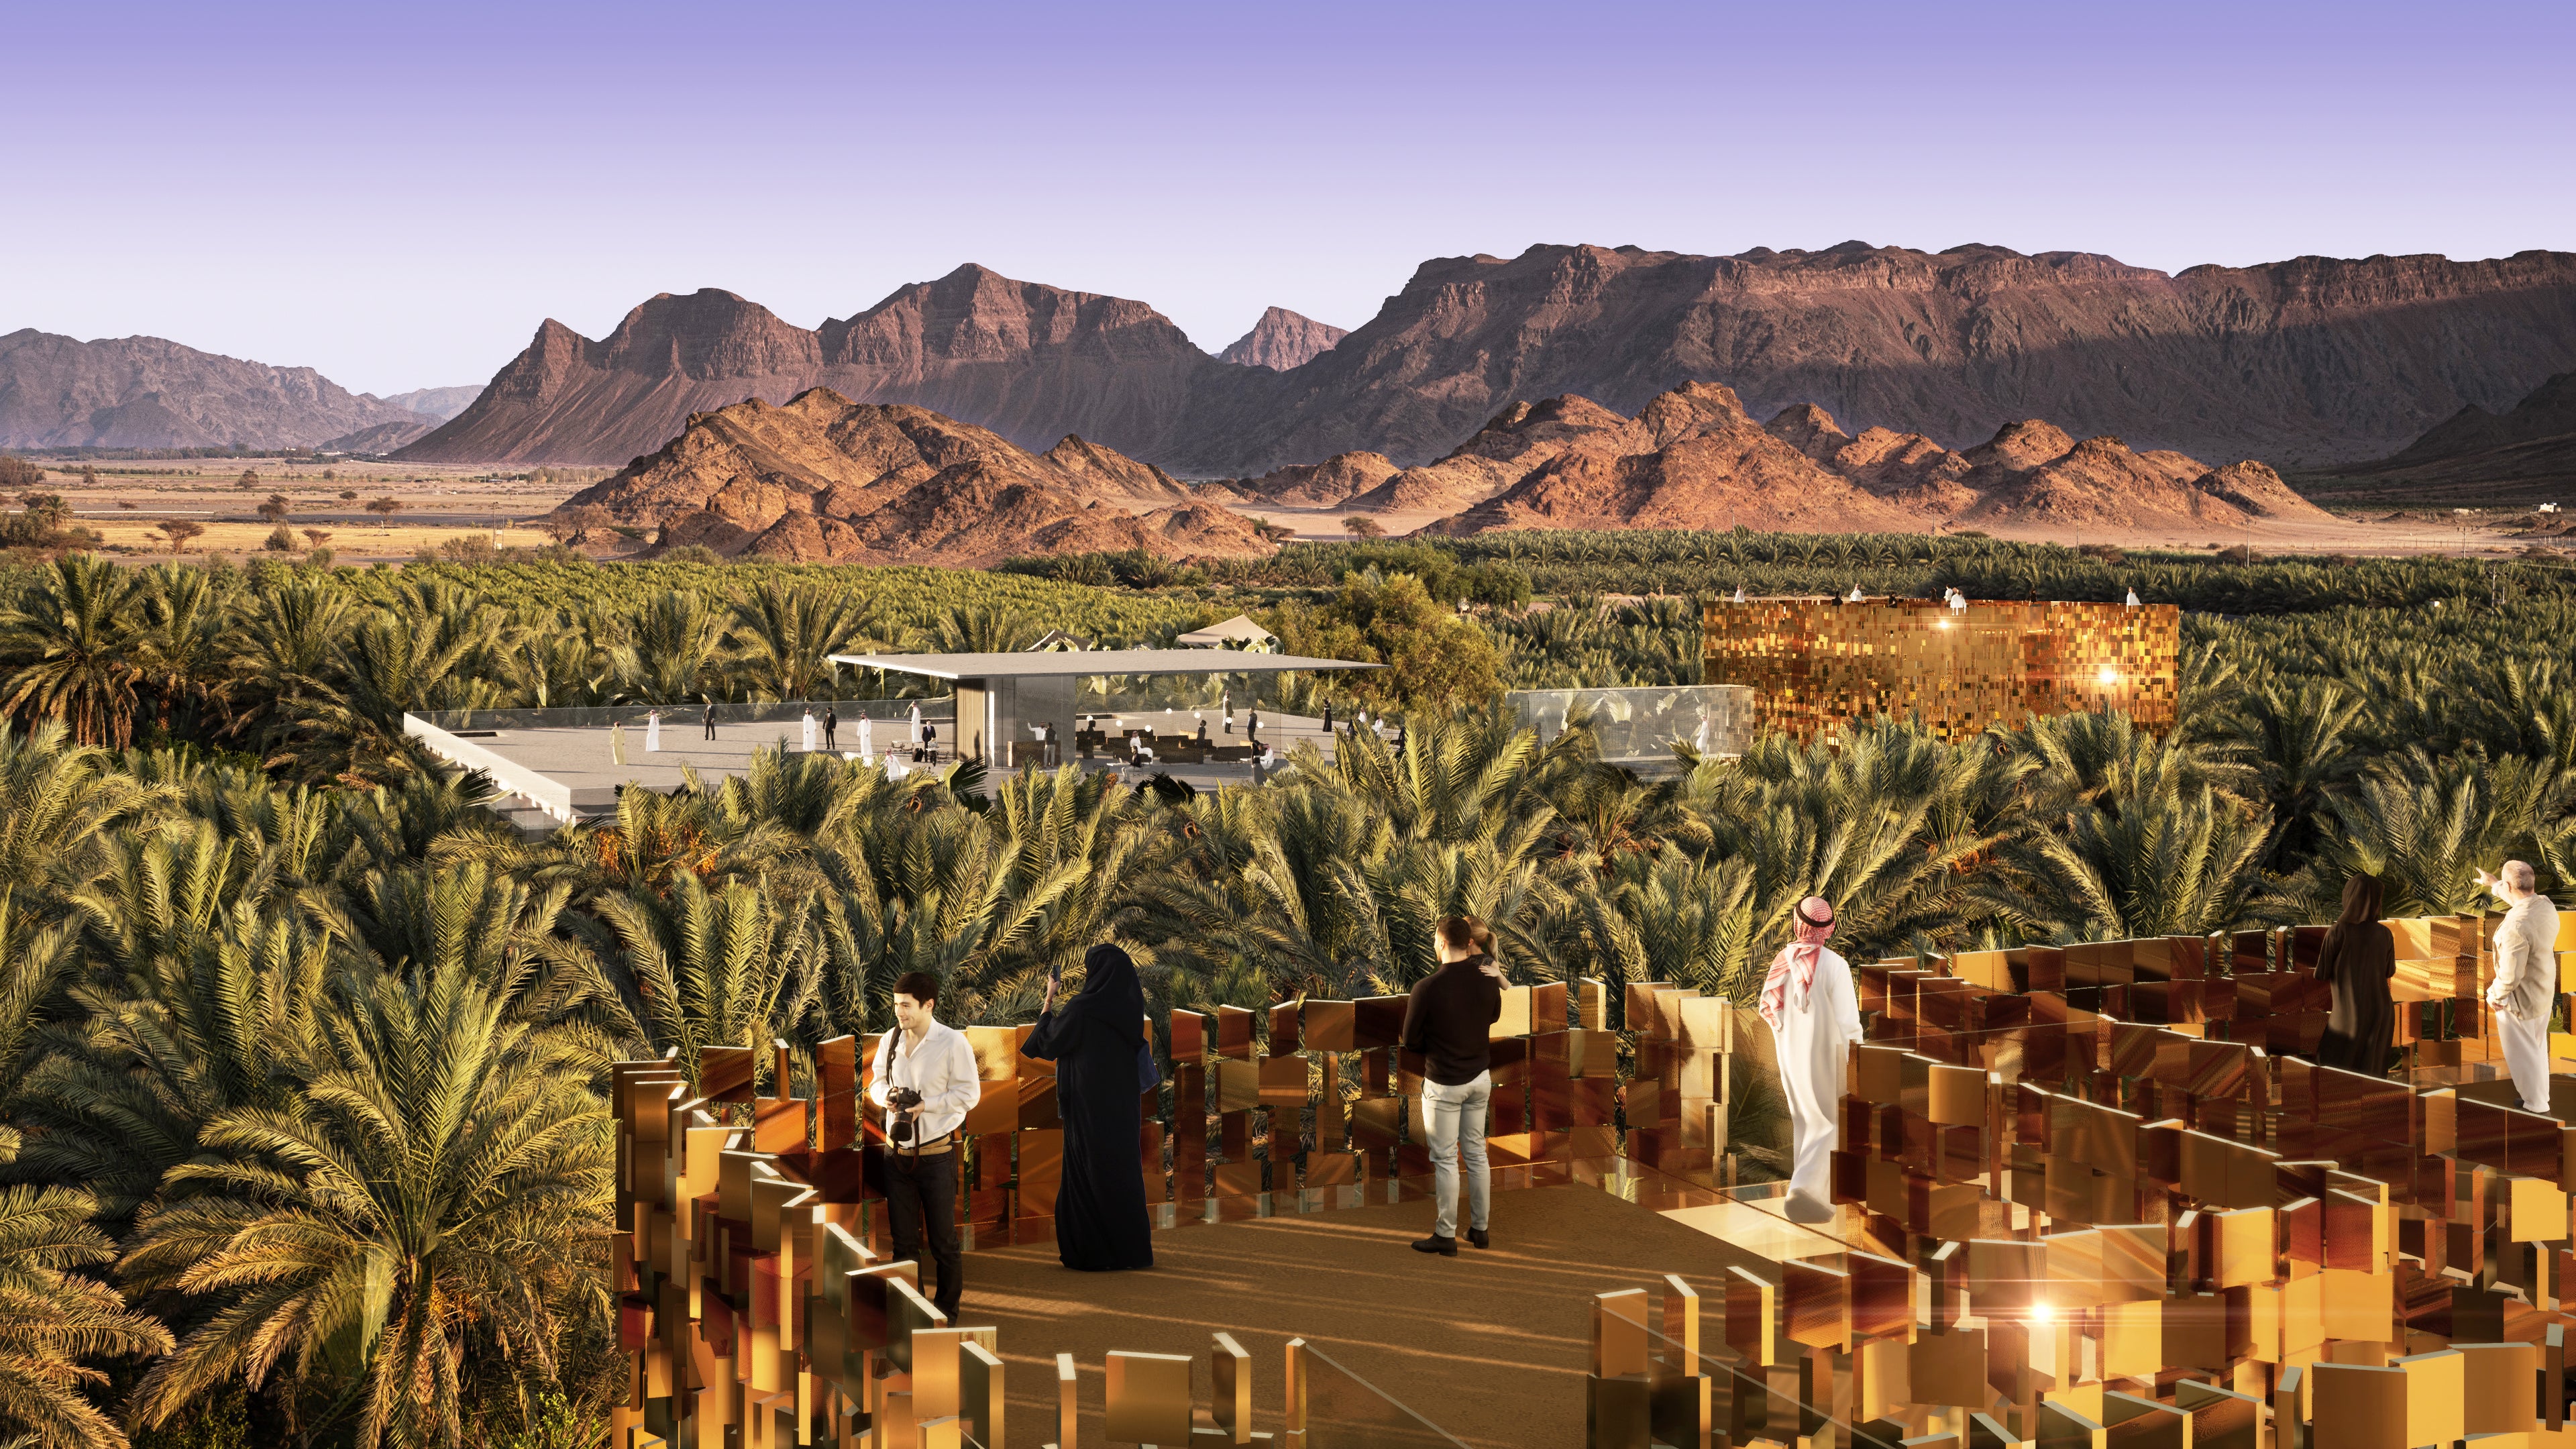 Tourism is central to AlUla but it’s just one part of the Masterplan